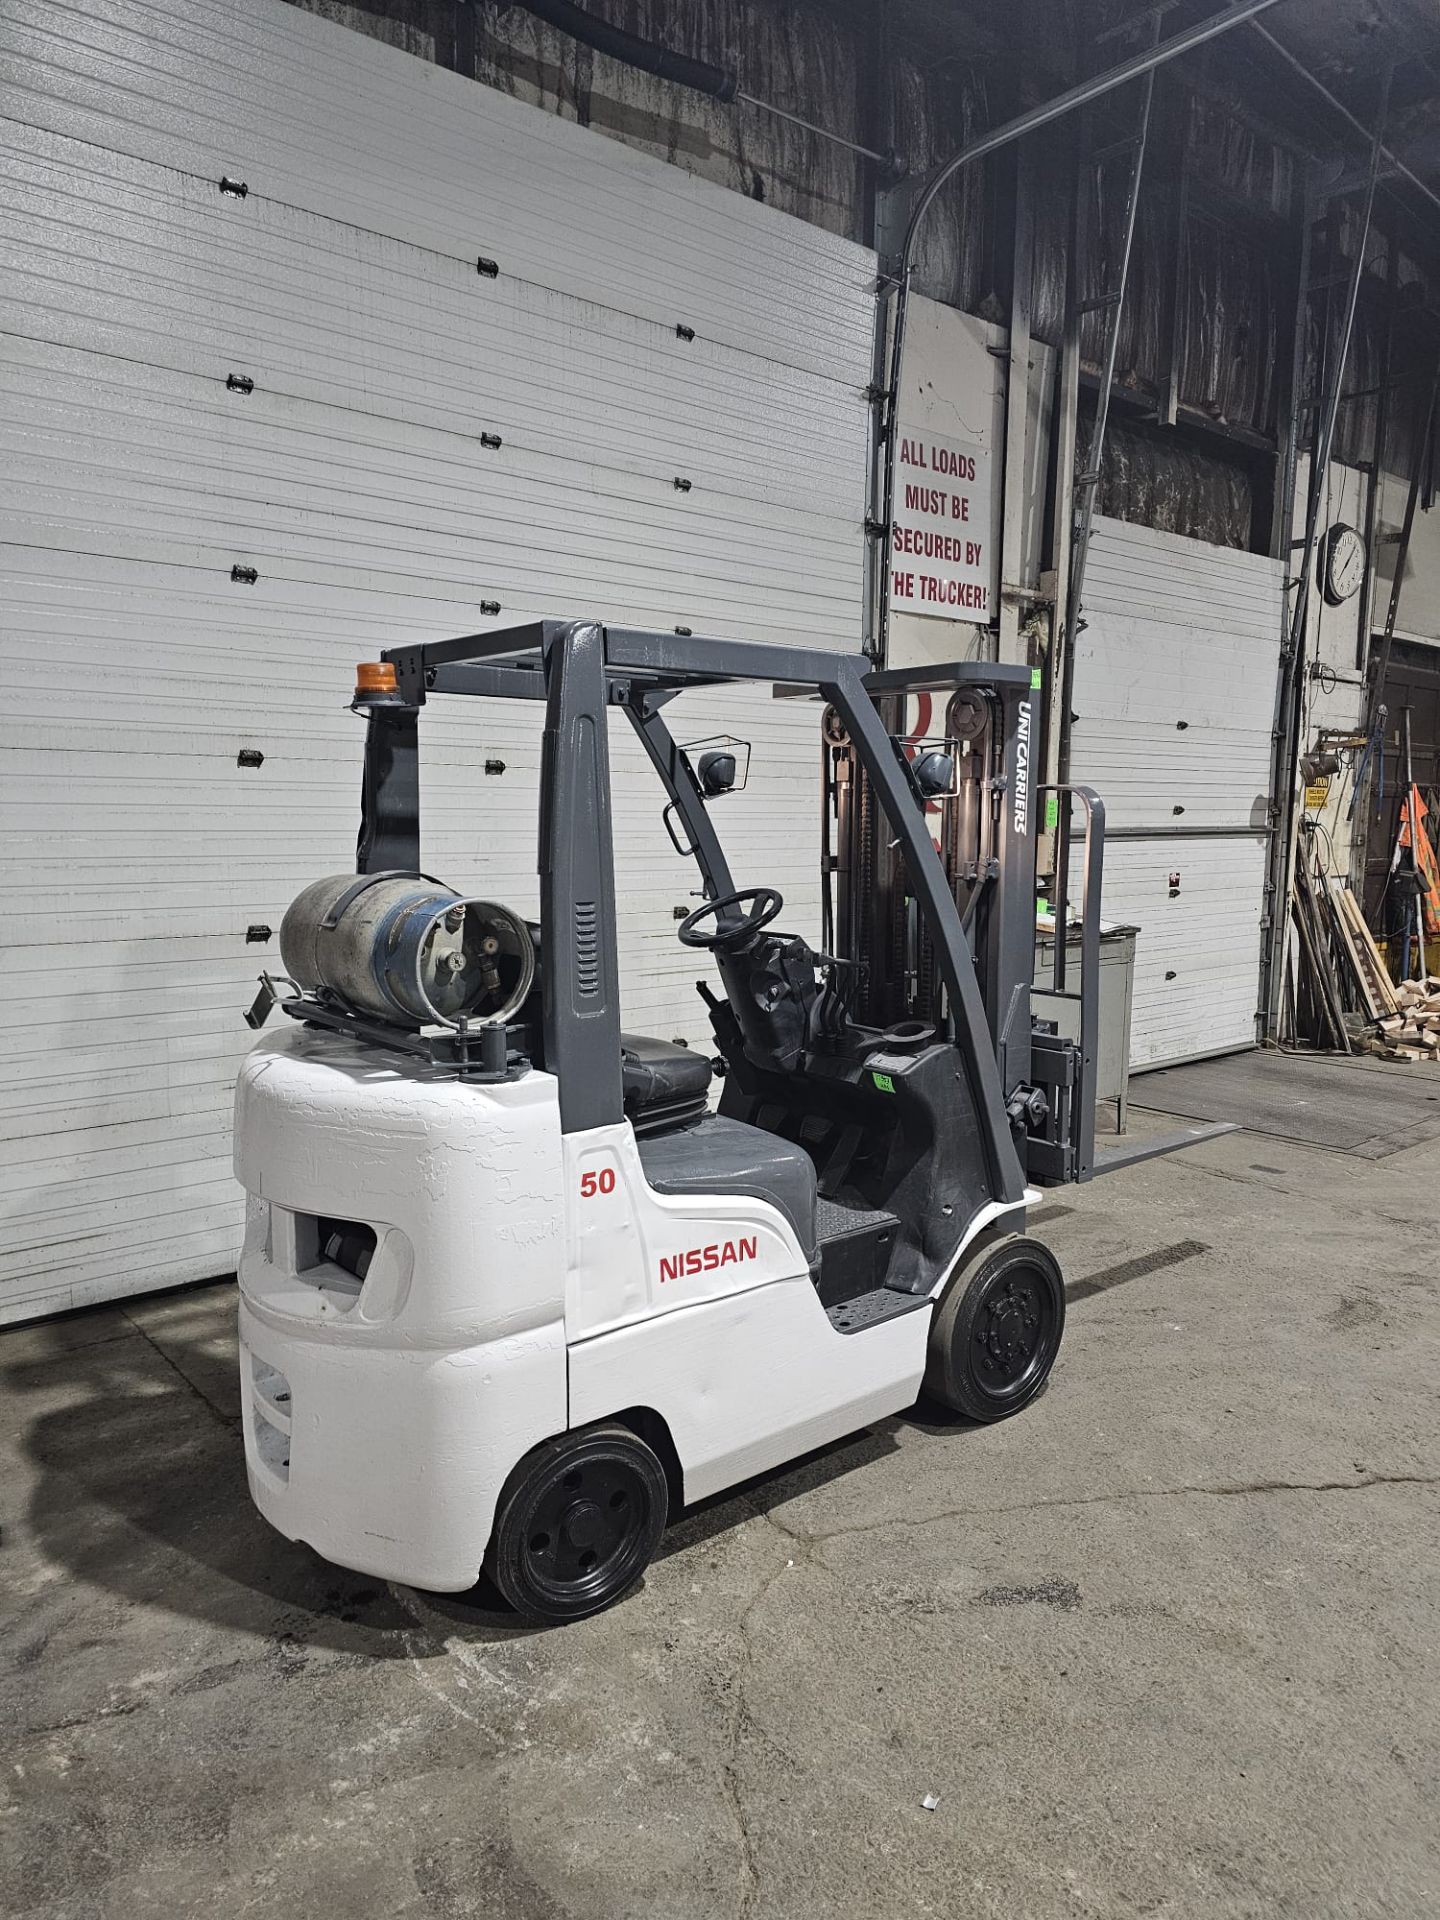 2013 Nissan 5000lbs Capacity LPG (Propane) Forklift 3-STAGE MAST with sideshift (no propane tank - Image 2 of 5